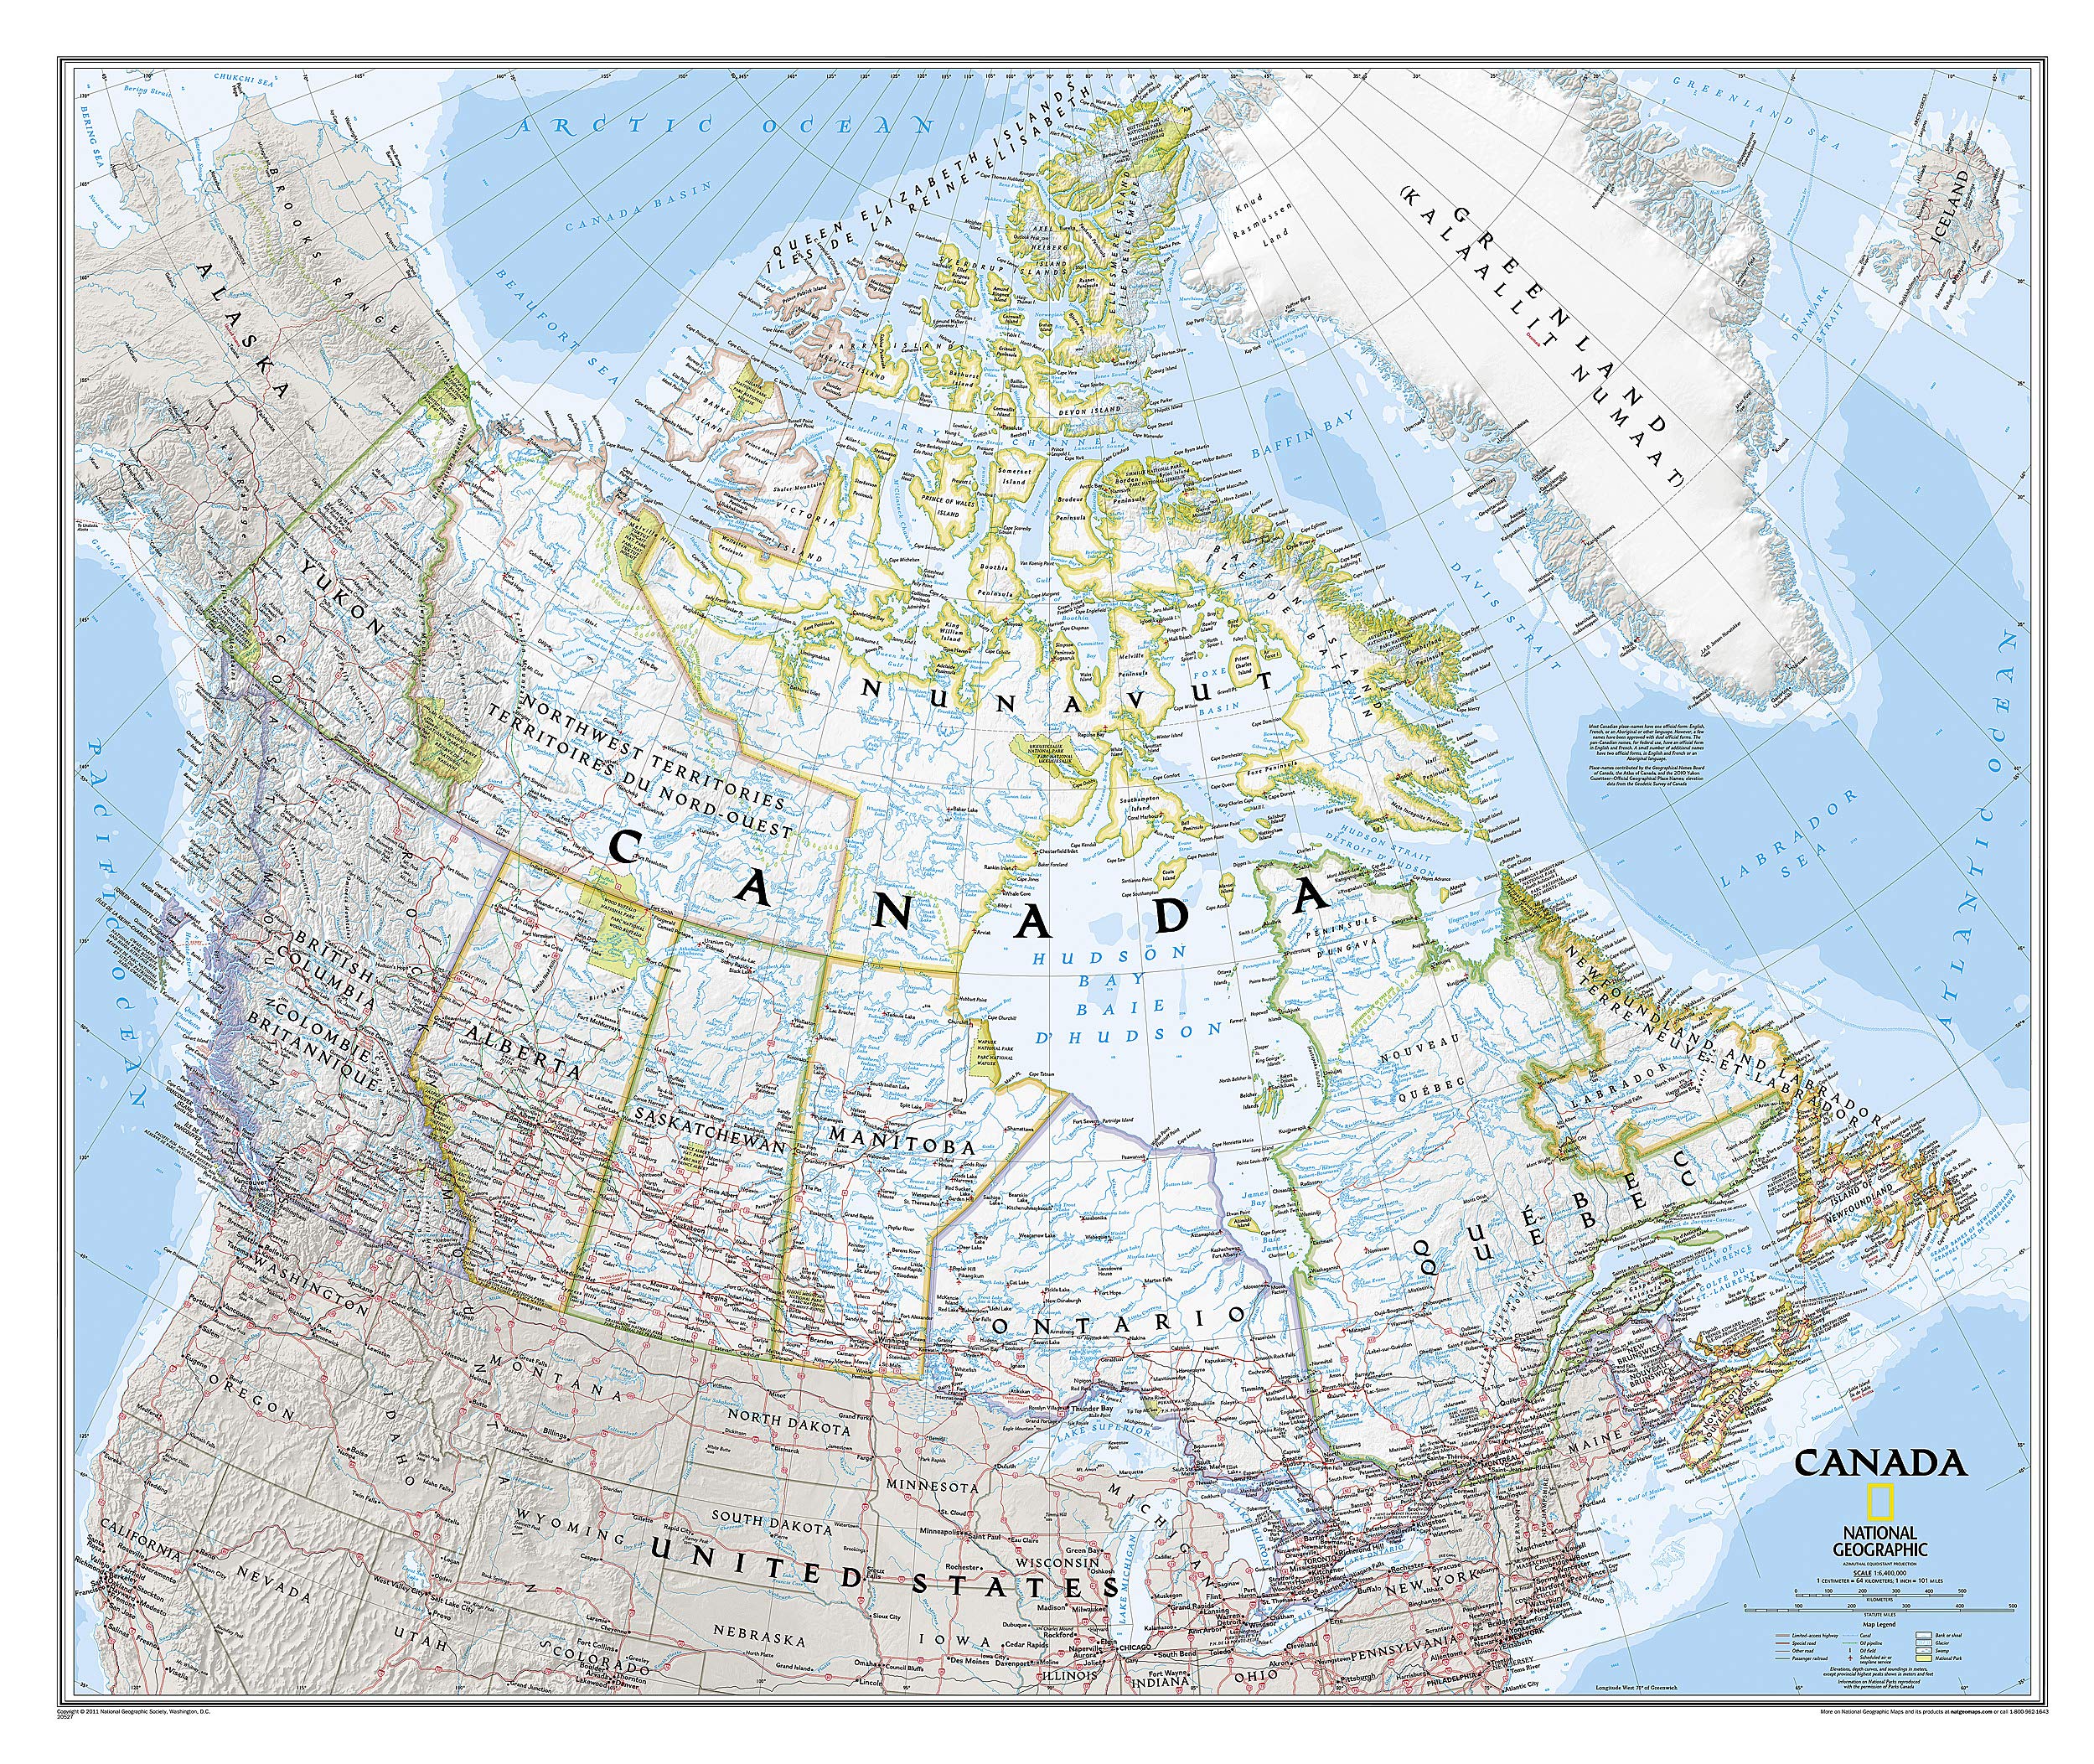 National Geographic Canada Wall Map - Classic - Laminated (38 x 32 in) (National Geographic Reference Map)